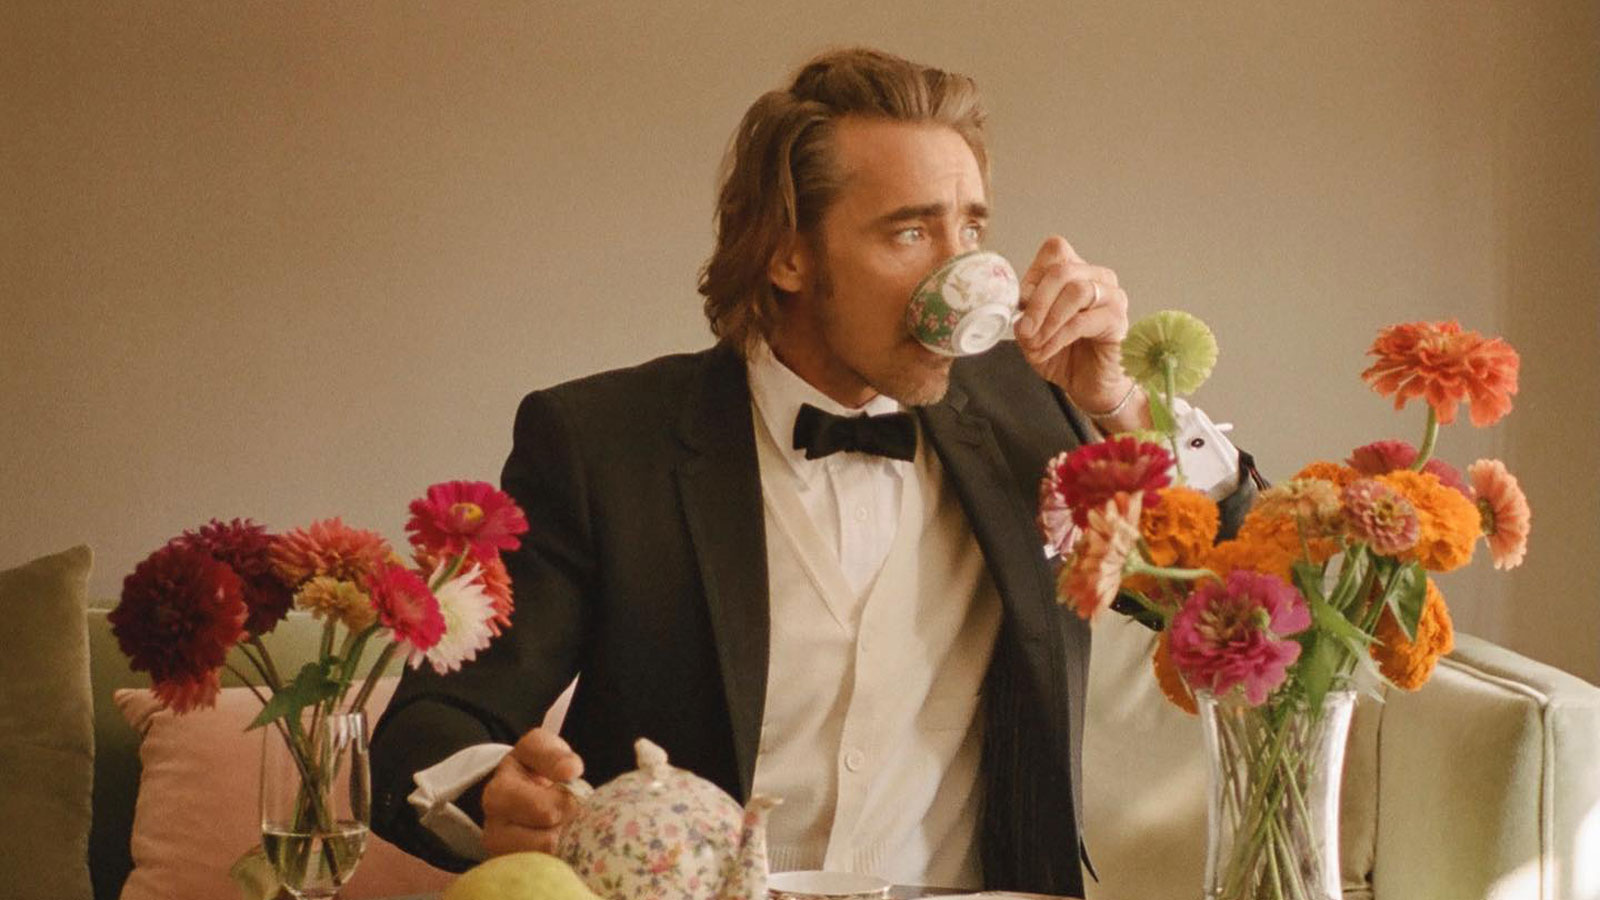 Meet Lee Pace, The Hobbit & Marvel Star Who May Have Gone Unnoticed